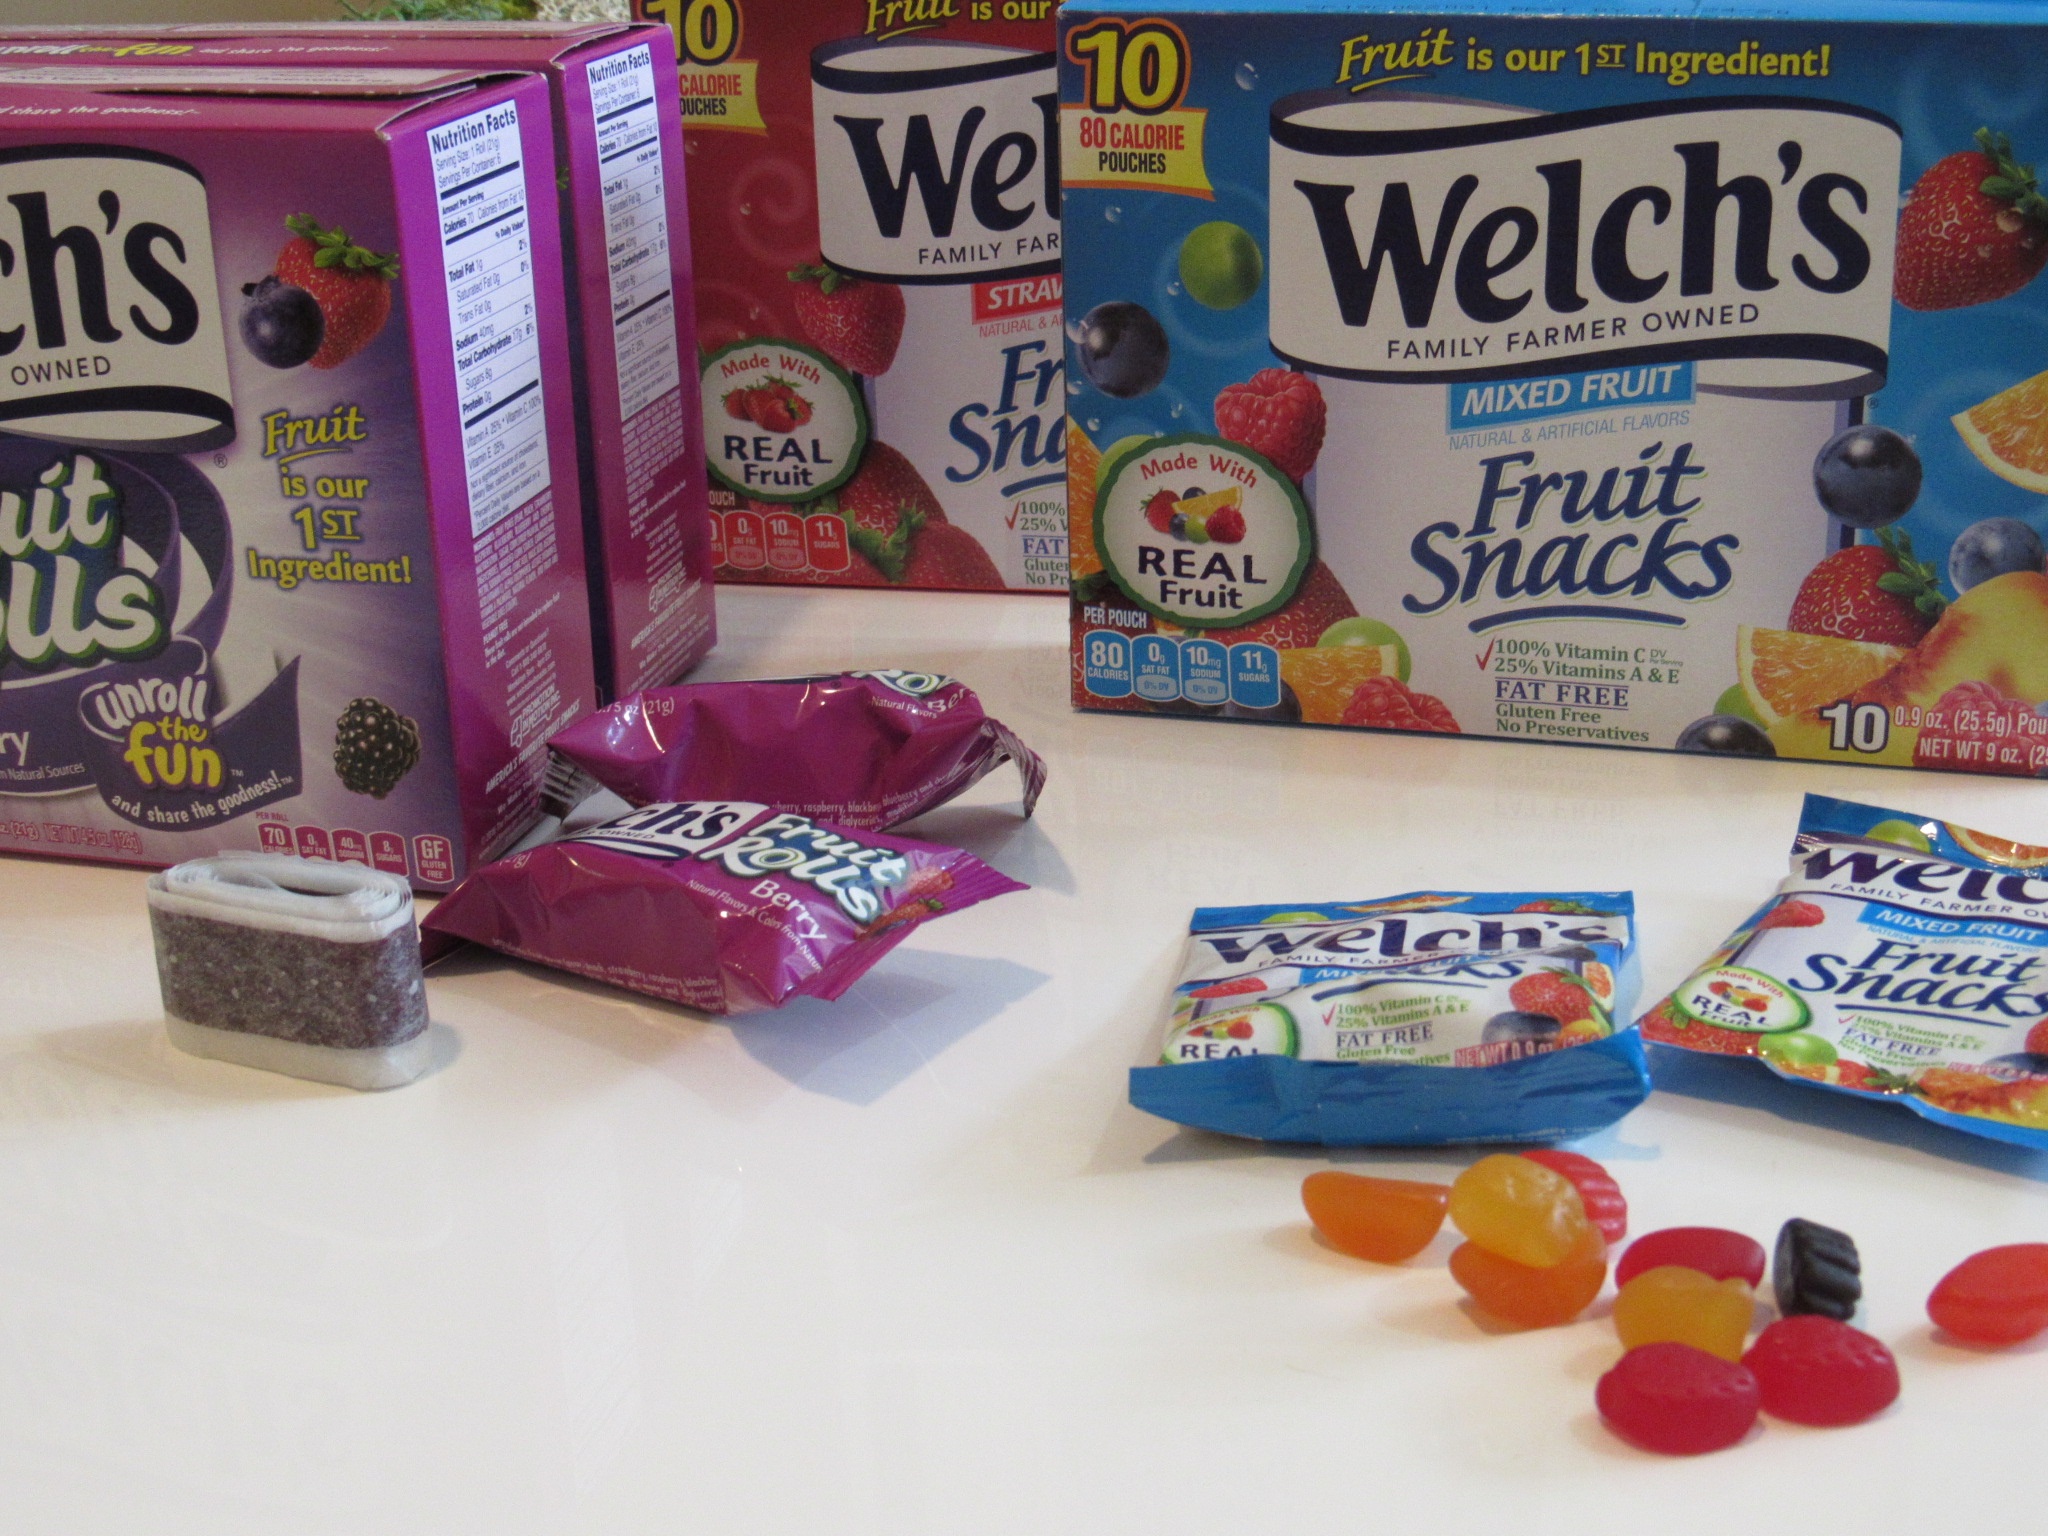 Summer Snacking With Welch's